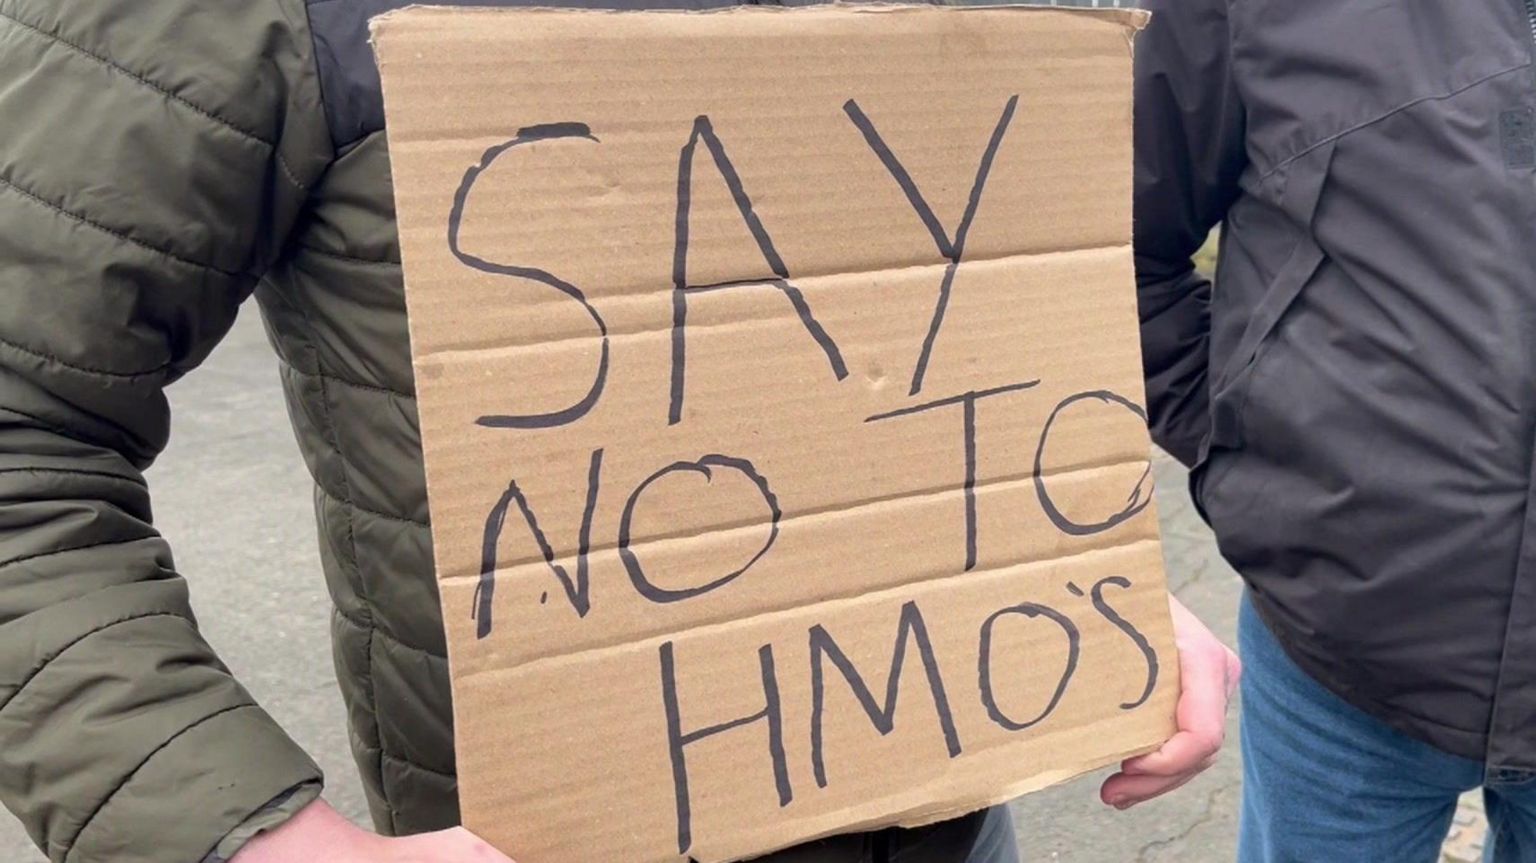 A campaigner holds a 'Say No To HMOs' sign